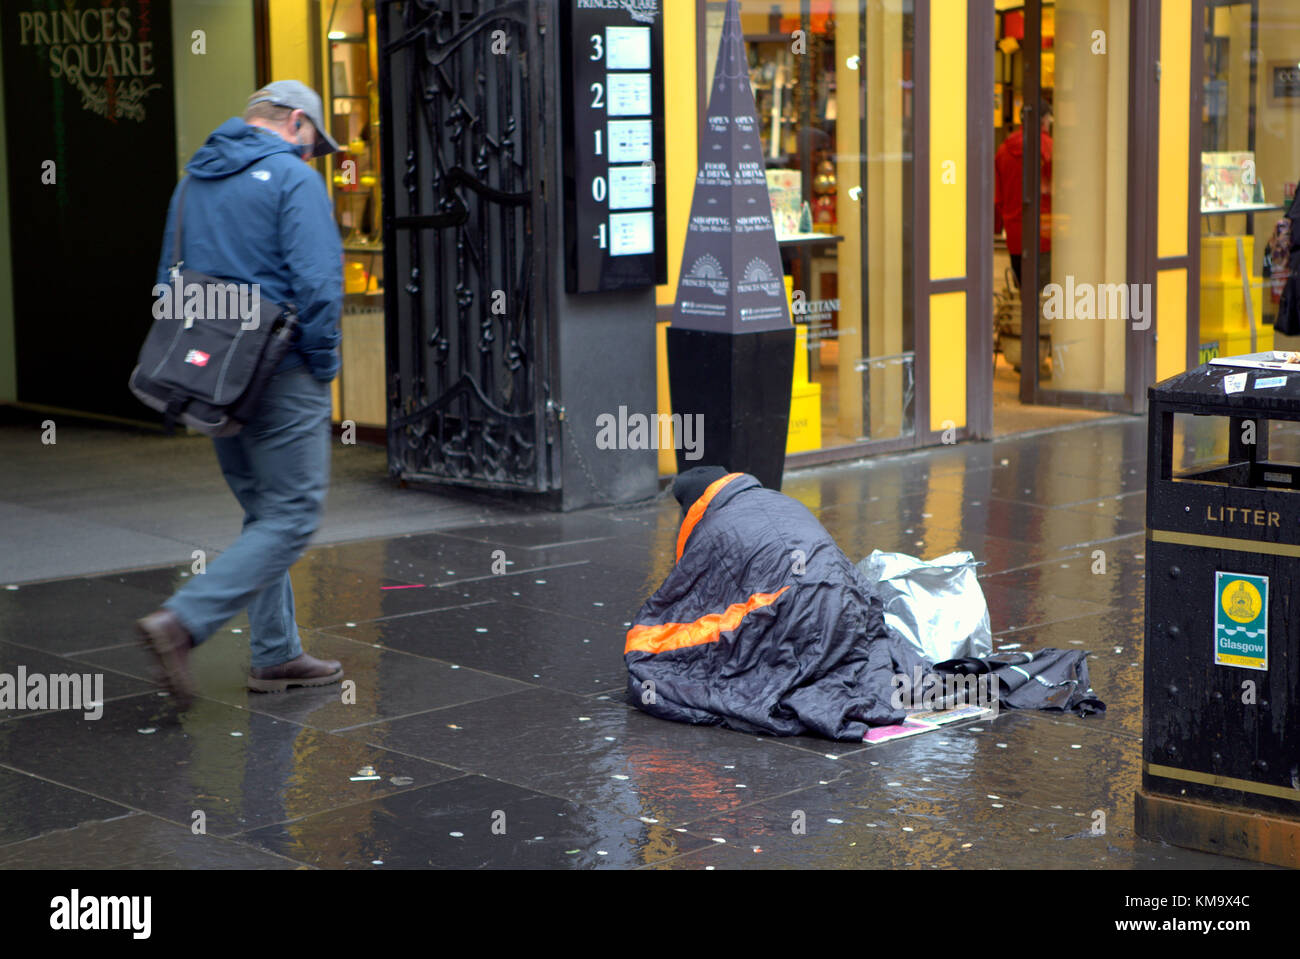 homeless man in a sleeping bag on buchanan  street on the style mile with possessions begging in front of the upmarket princes square shopping centre Stock Photo